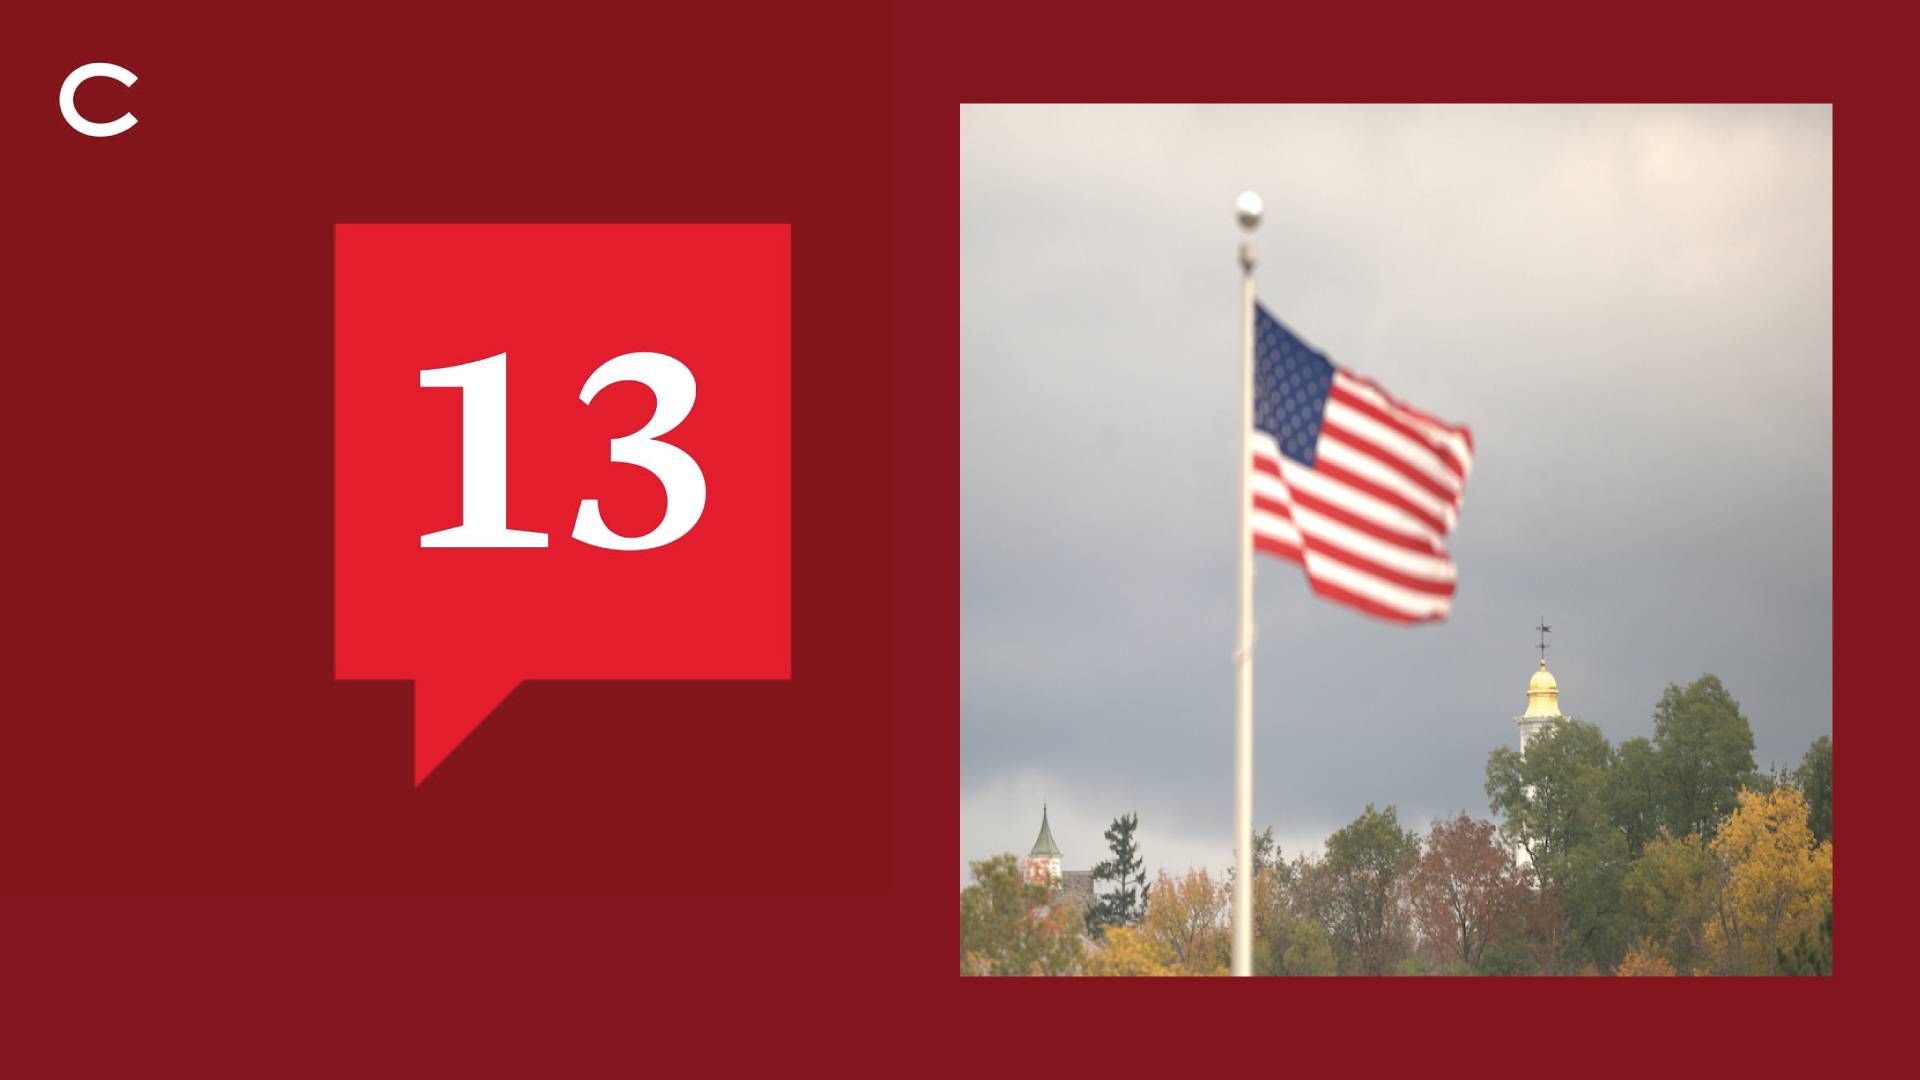 13 Podcast logo in red on maroon along with the American flag in the foreground and Colgate Memorial Chapel in the background surrounded by autumn leaves and sky